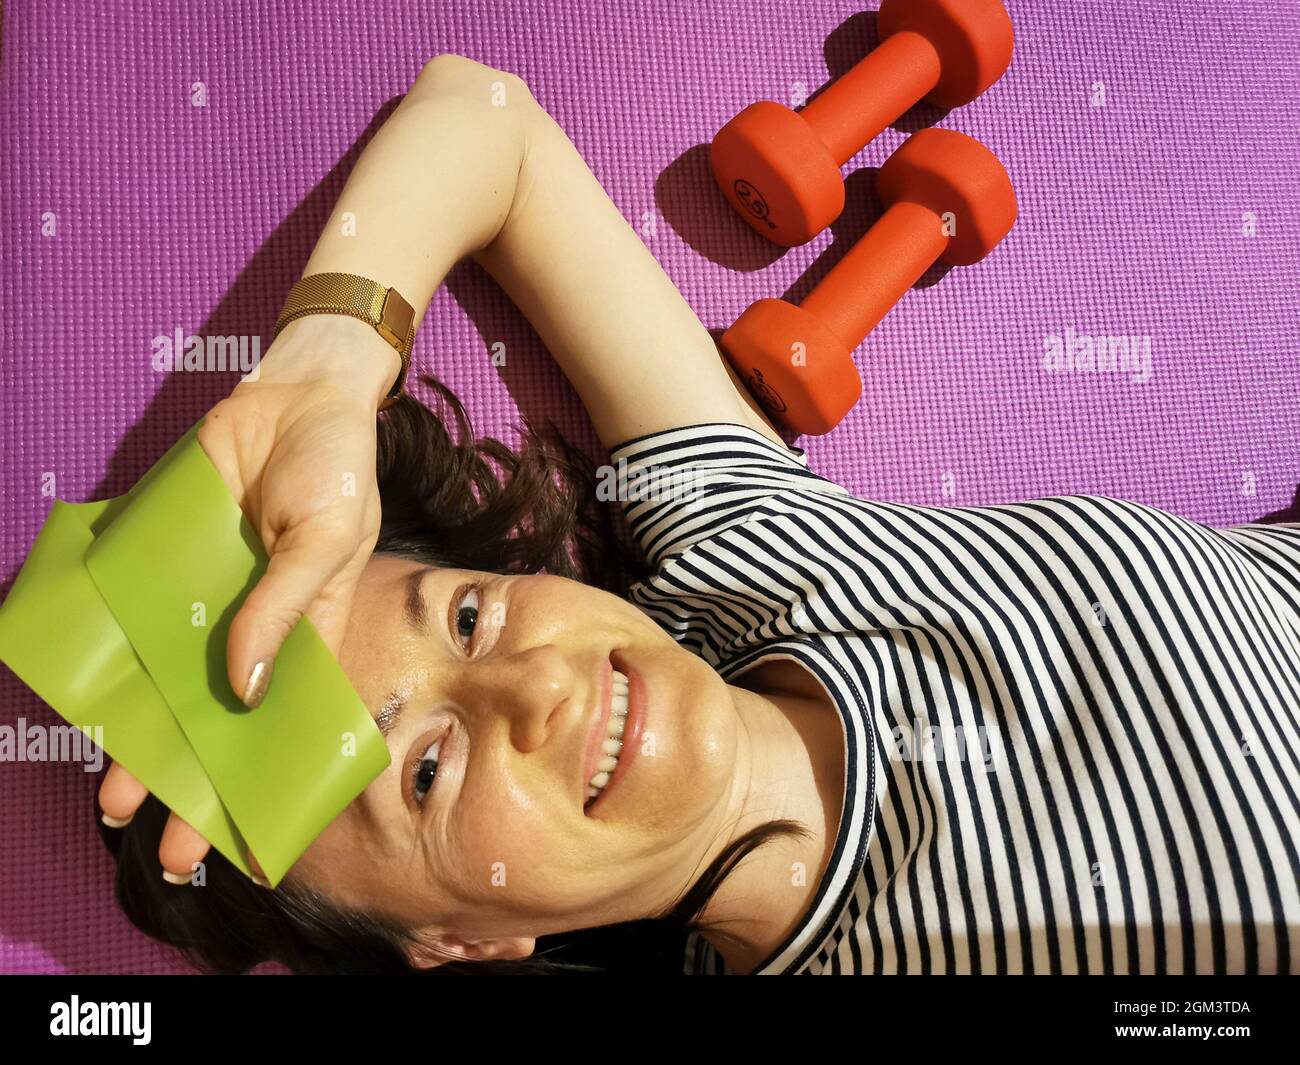 A smiling girl, tired of exercising, is lying on a yoga mat with 2.5 kg weights Stock Photo